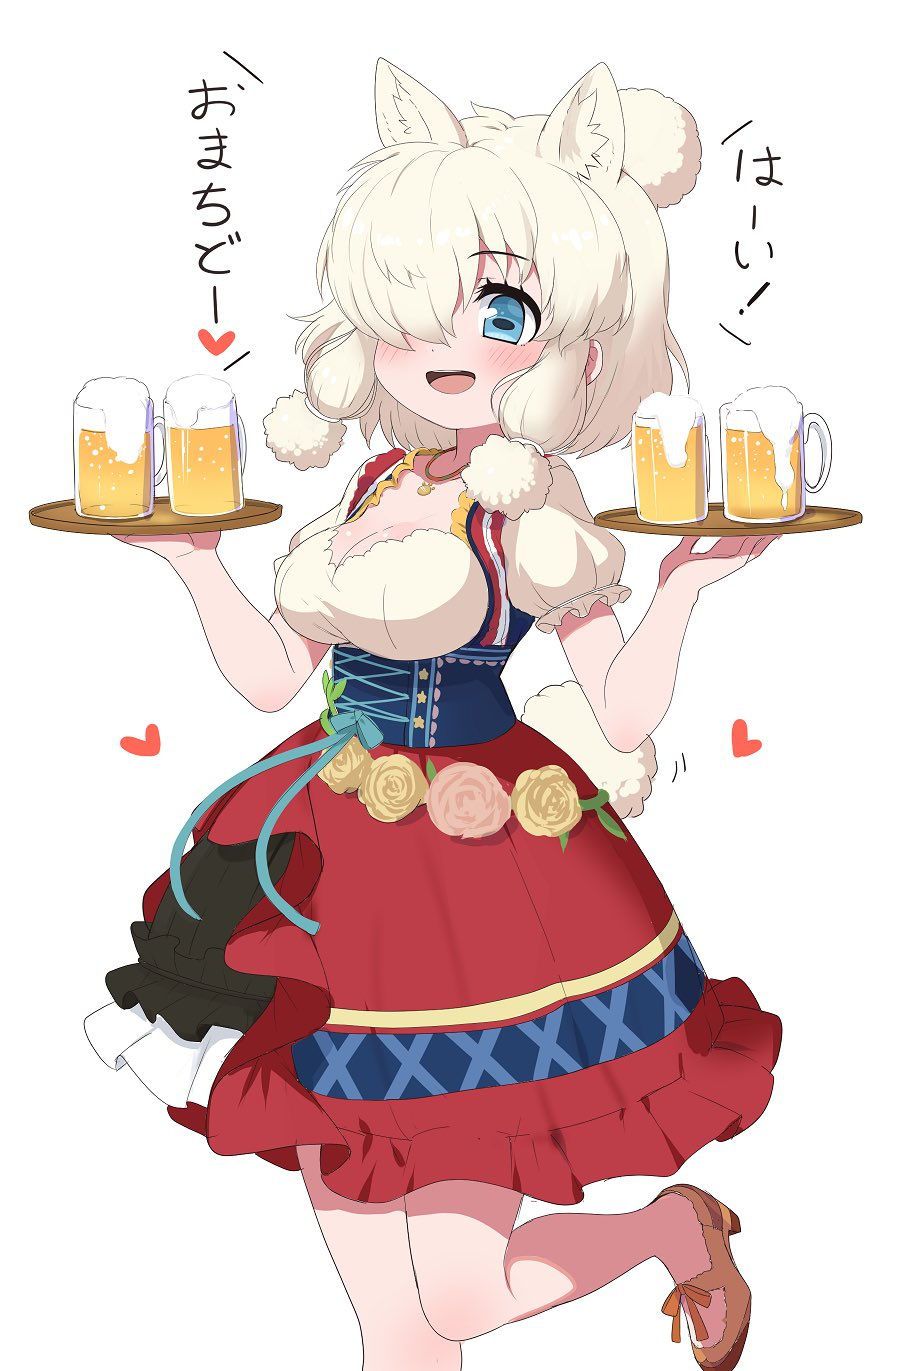 【Diandre】Cute traditional costume image ♪ of beer garden waiter and town girl 18